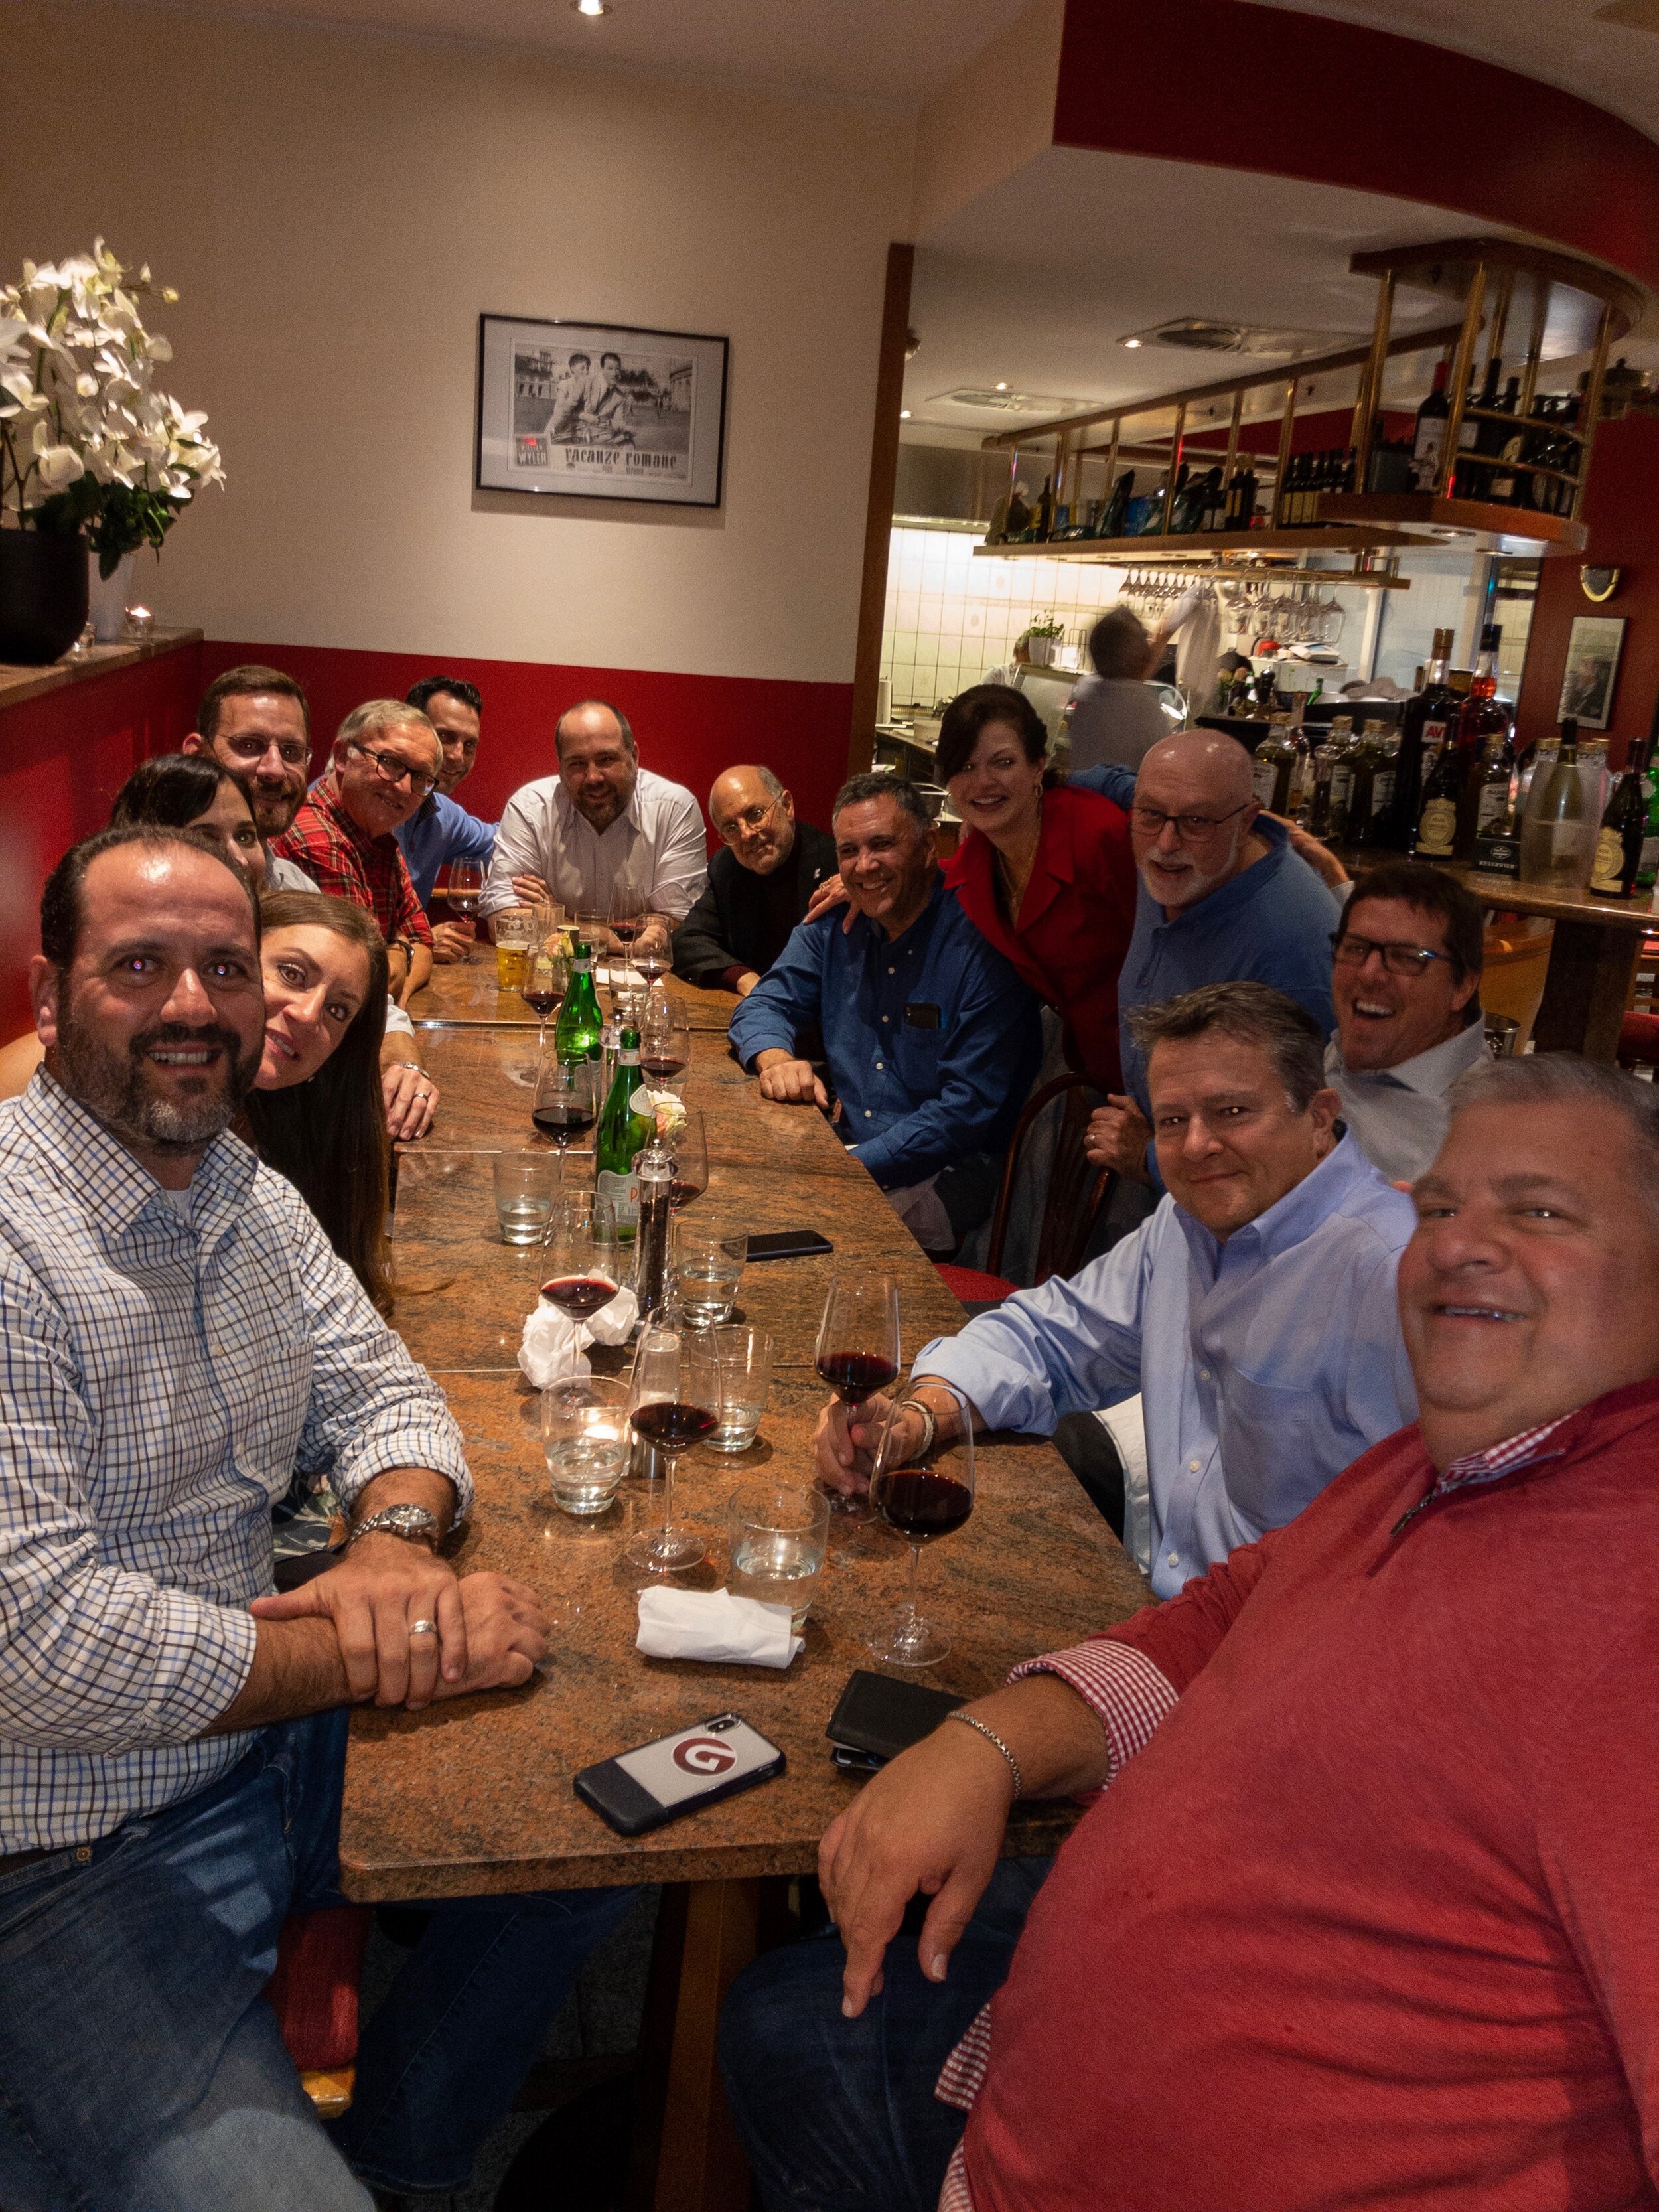   Dinner, October 17:  fun times at Casa Palmieri with the Plastics Technology/Gardner Publications and Wittmann Battenfeld teams!  